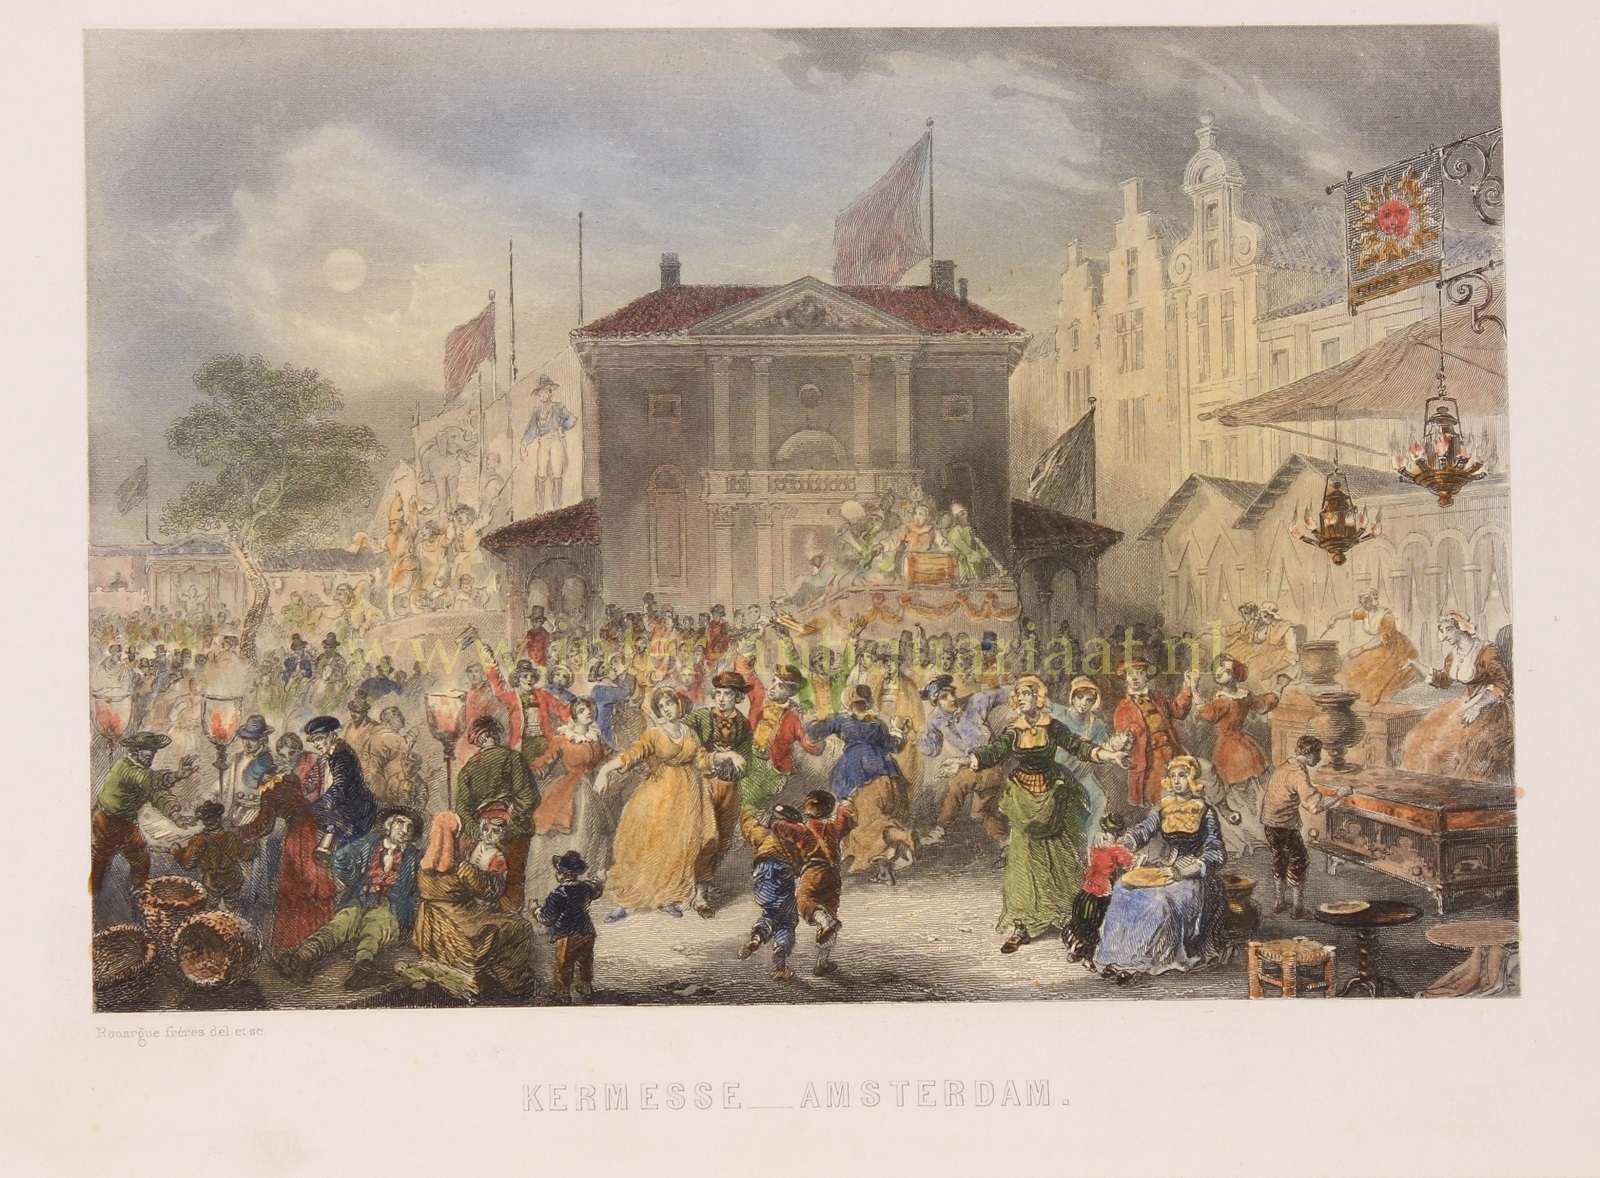  - Funfair in Amsterdam - Rouargue brothers, 1857